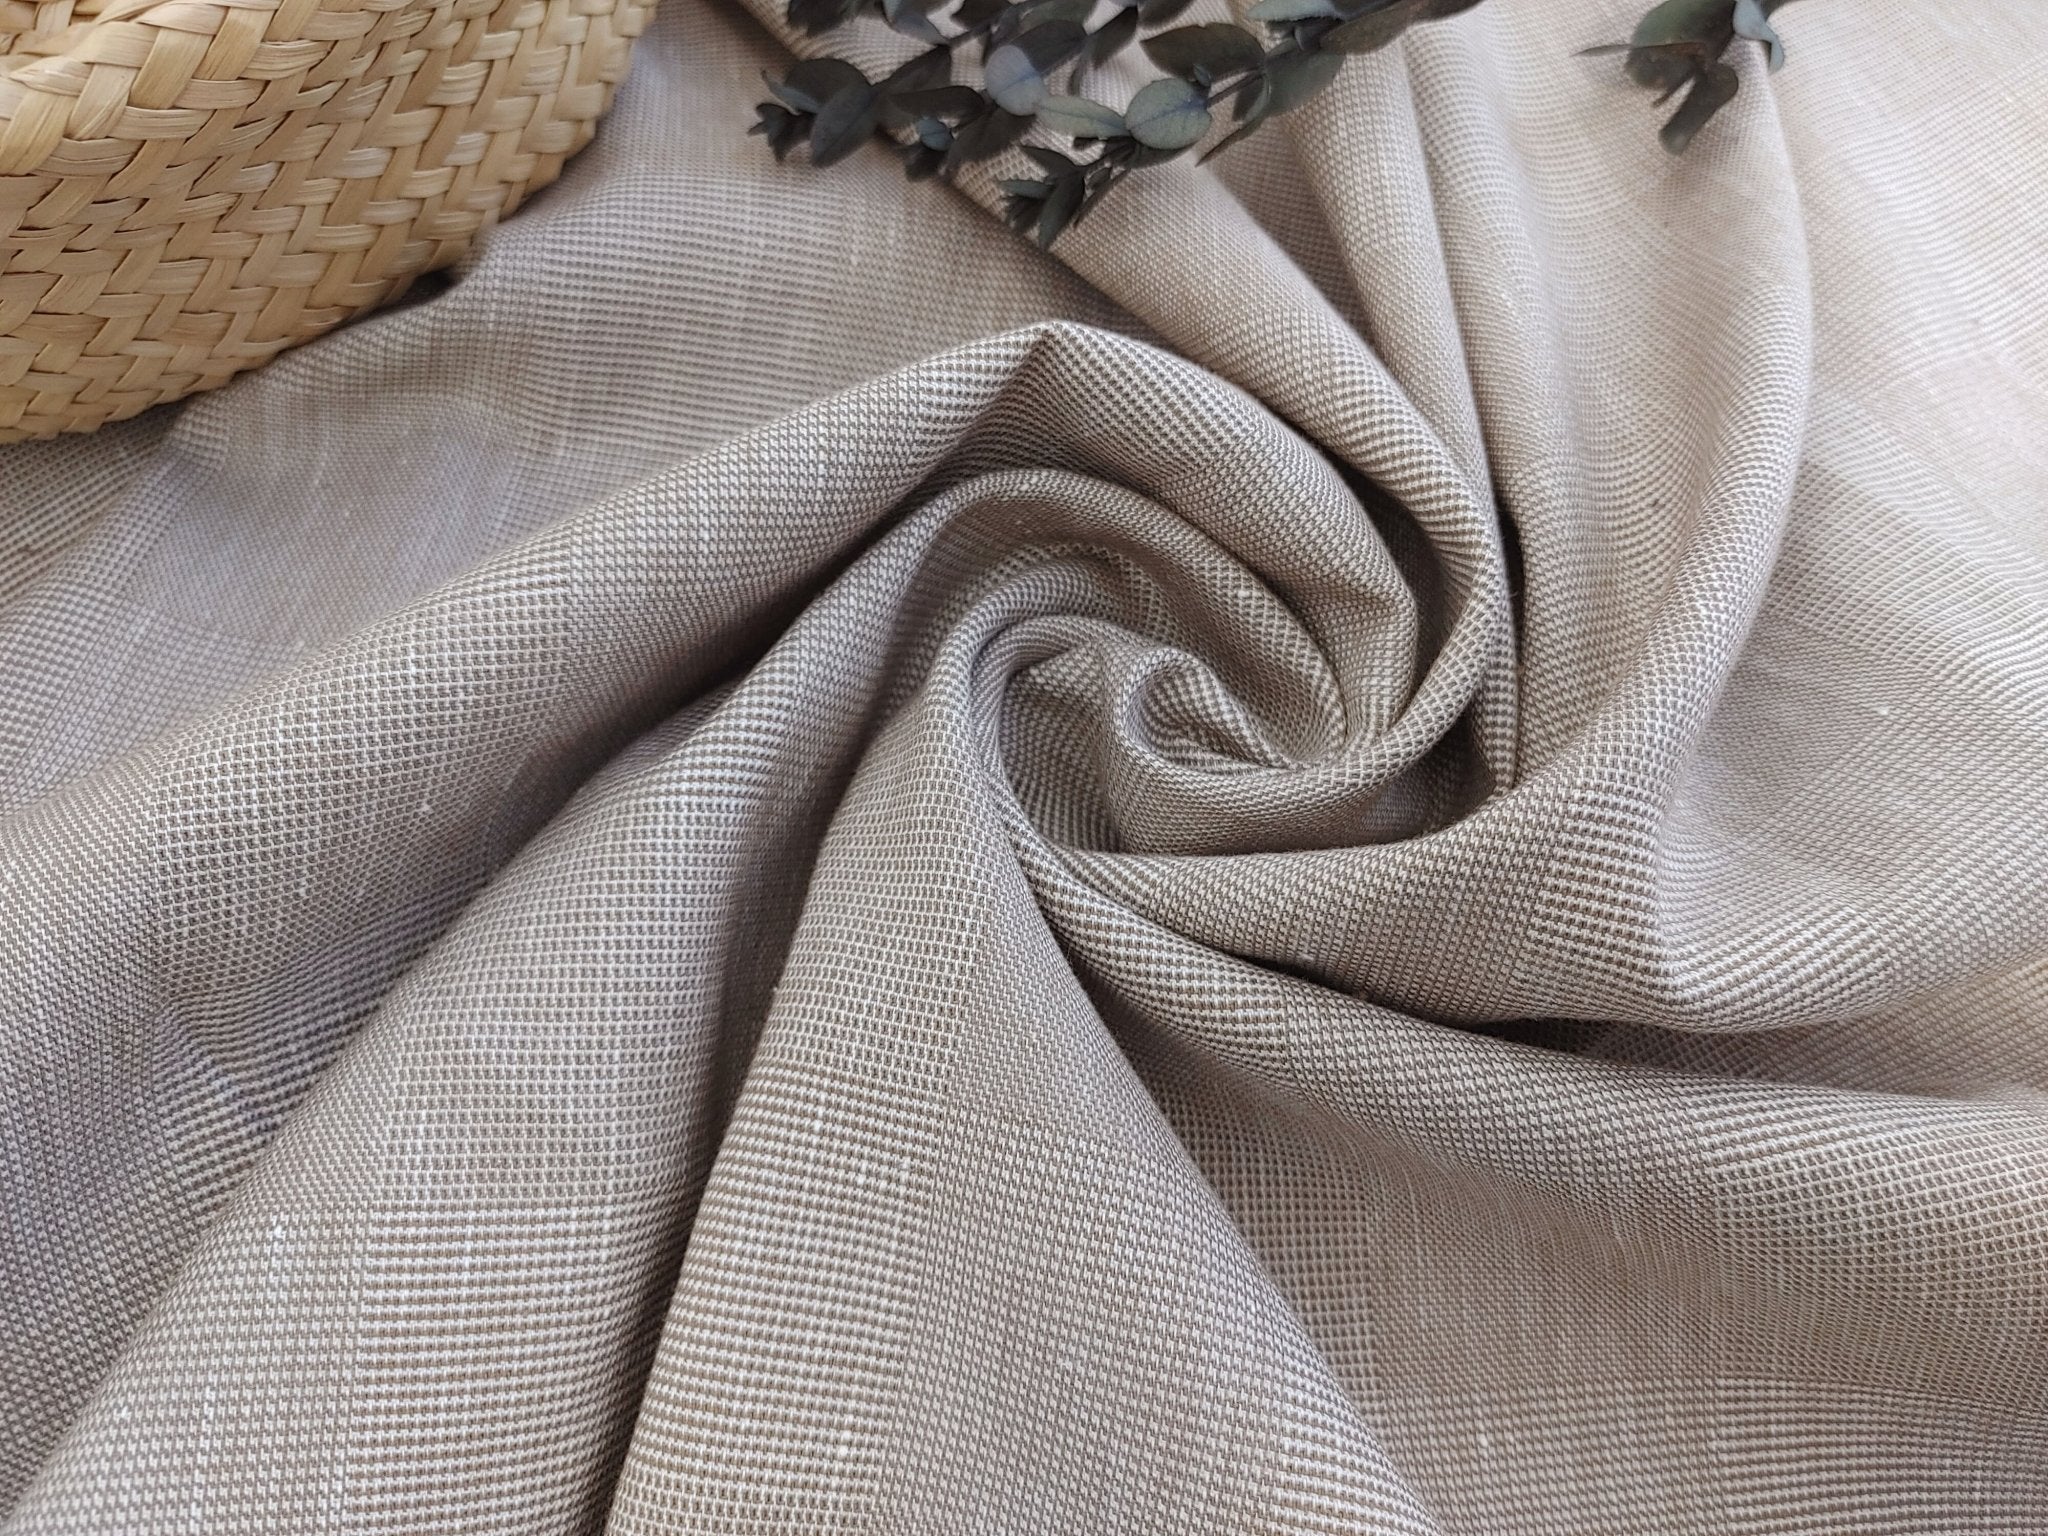 EaseBlend Beige Linen Stretch Fabric: Subtle Checkered Harmony 7295 - The Linen Lab - Beige